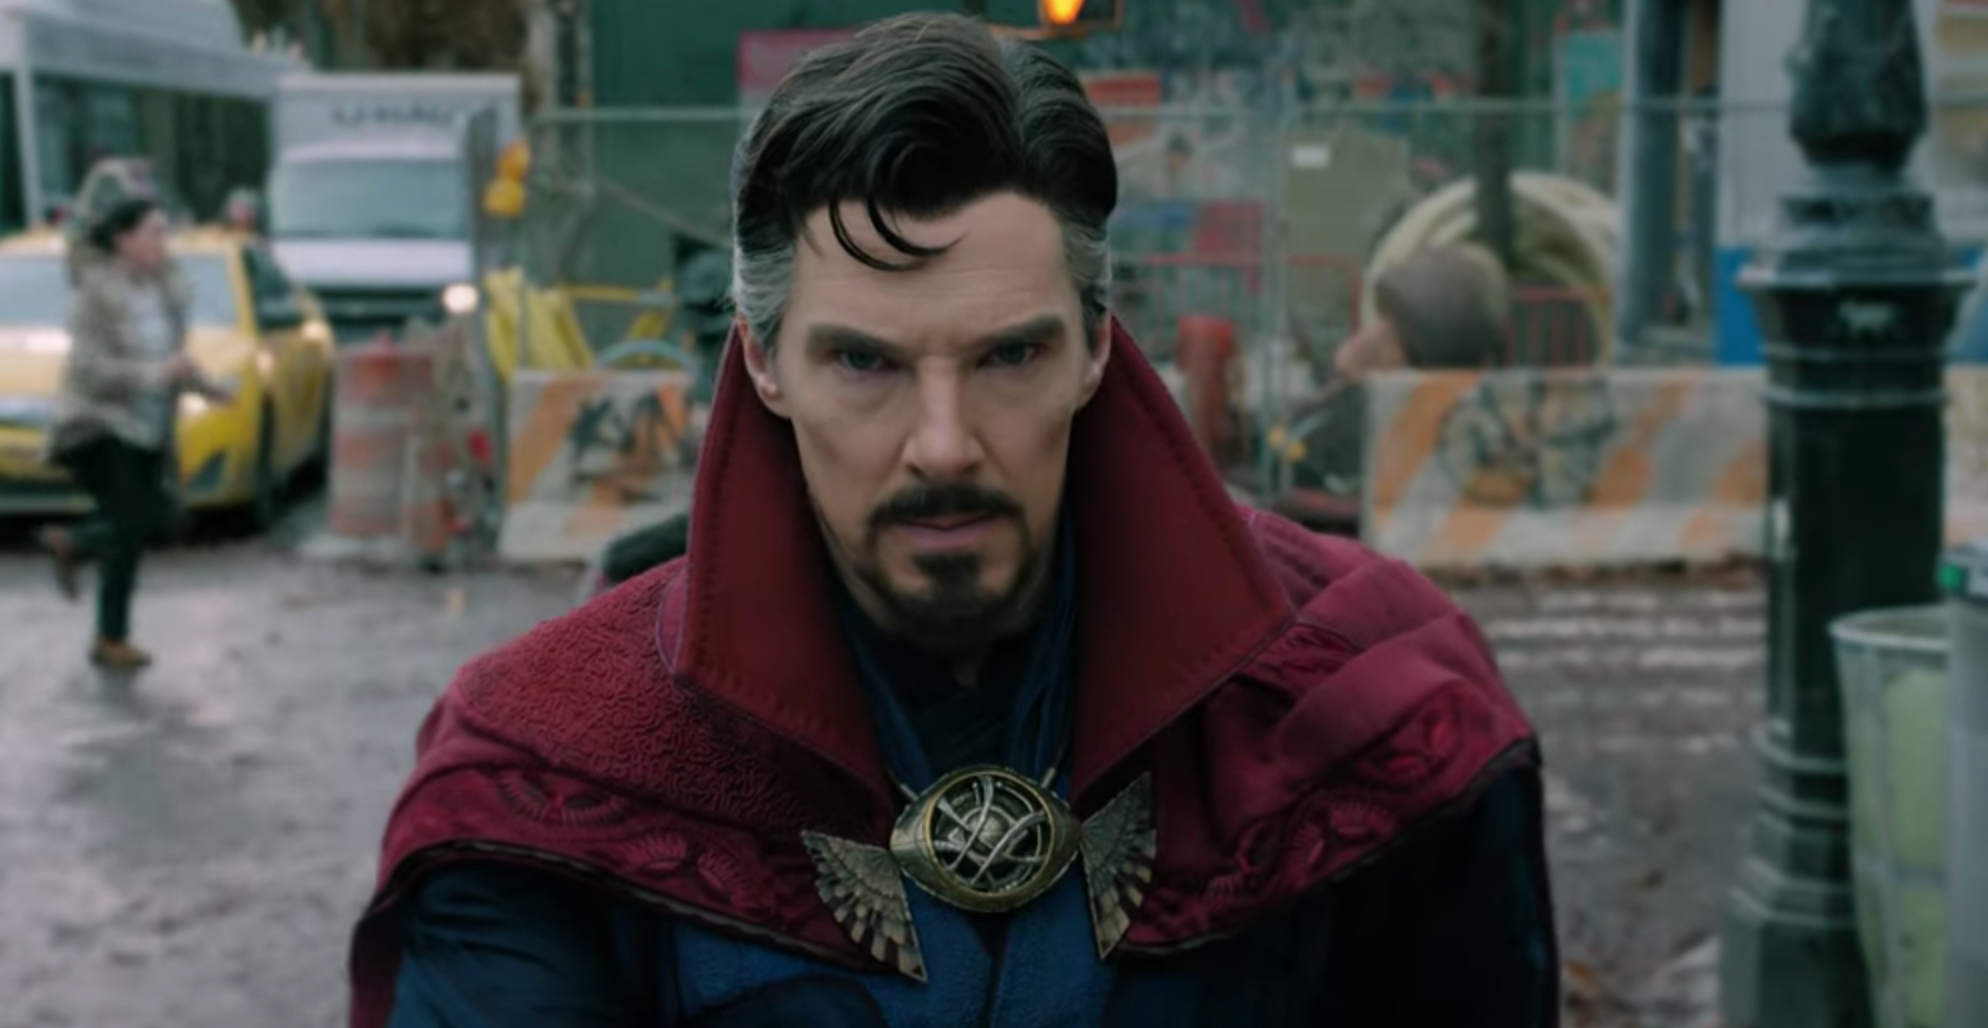 #BOXOFFICE: “DOCTOR STRANGE” HEALS THE BOX OFFICE IN DEBUT